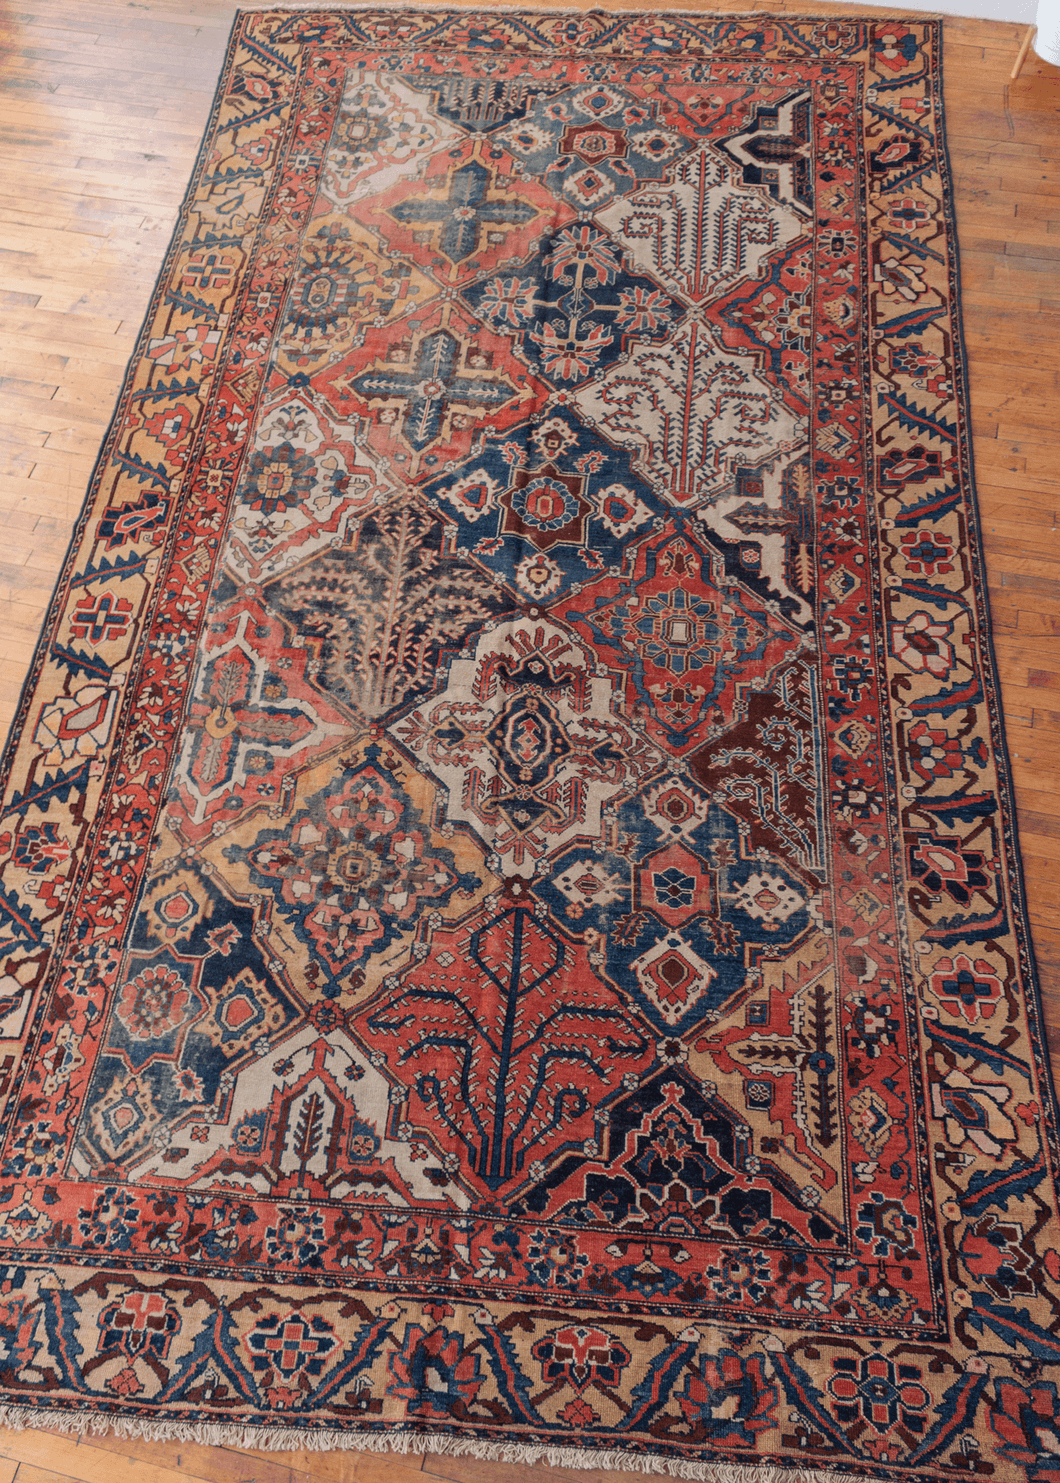 vintage bakhtiari rug with large scale lozenge pattern with garden motifs and serrated leaf and calyx border in earthy reds, yellows, blues, and browns